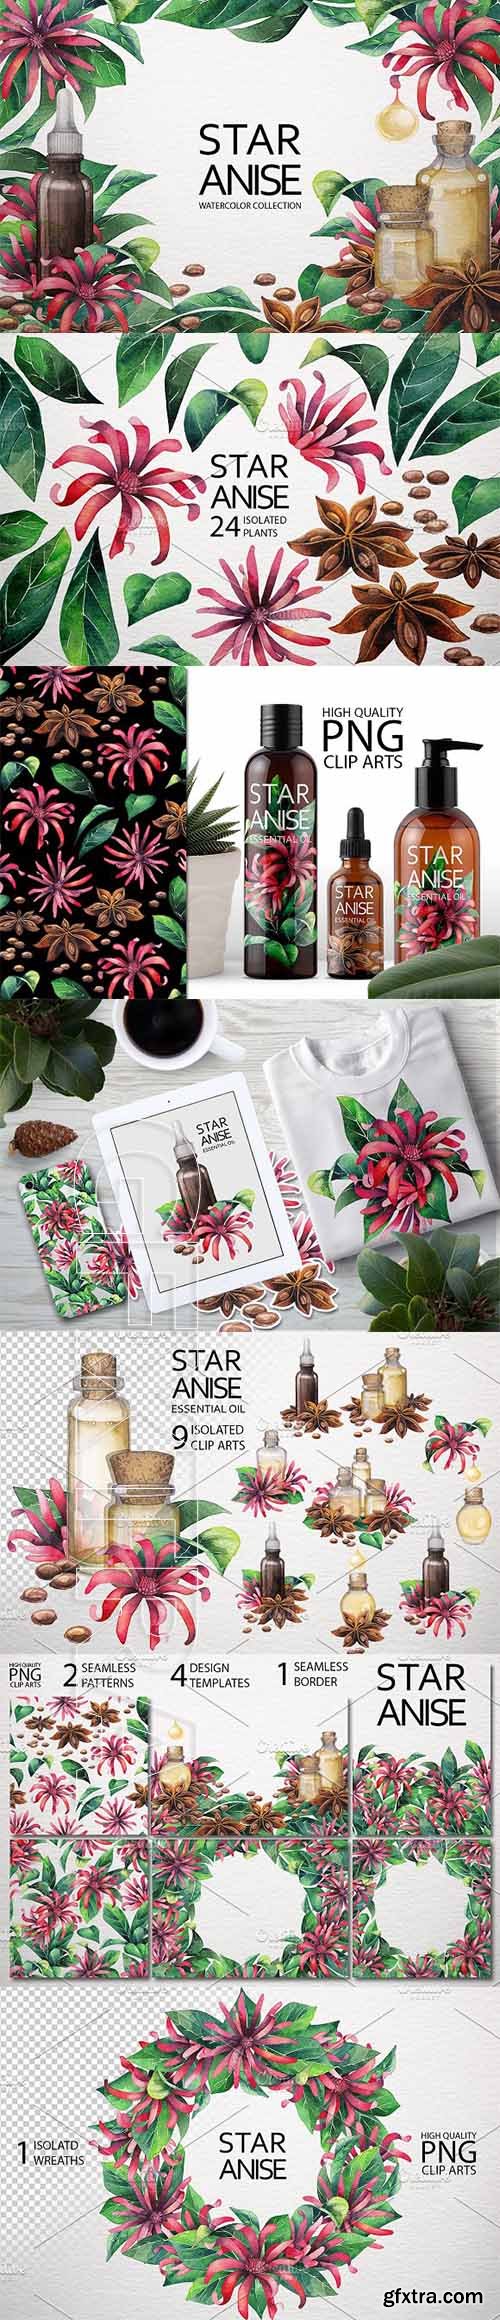 CreativeMarket - Watercolor Star Anise collection 2002808